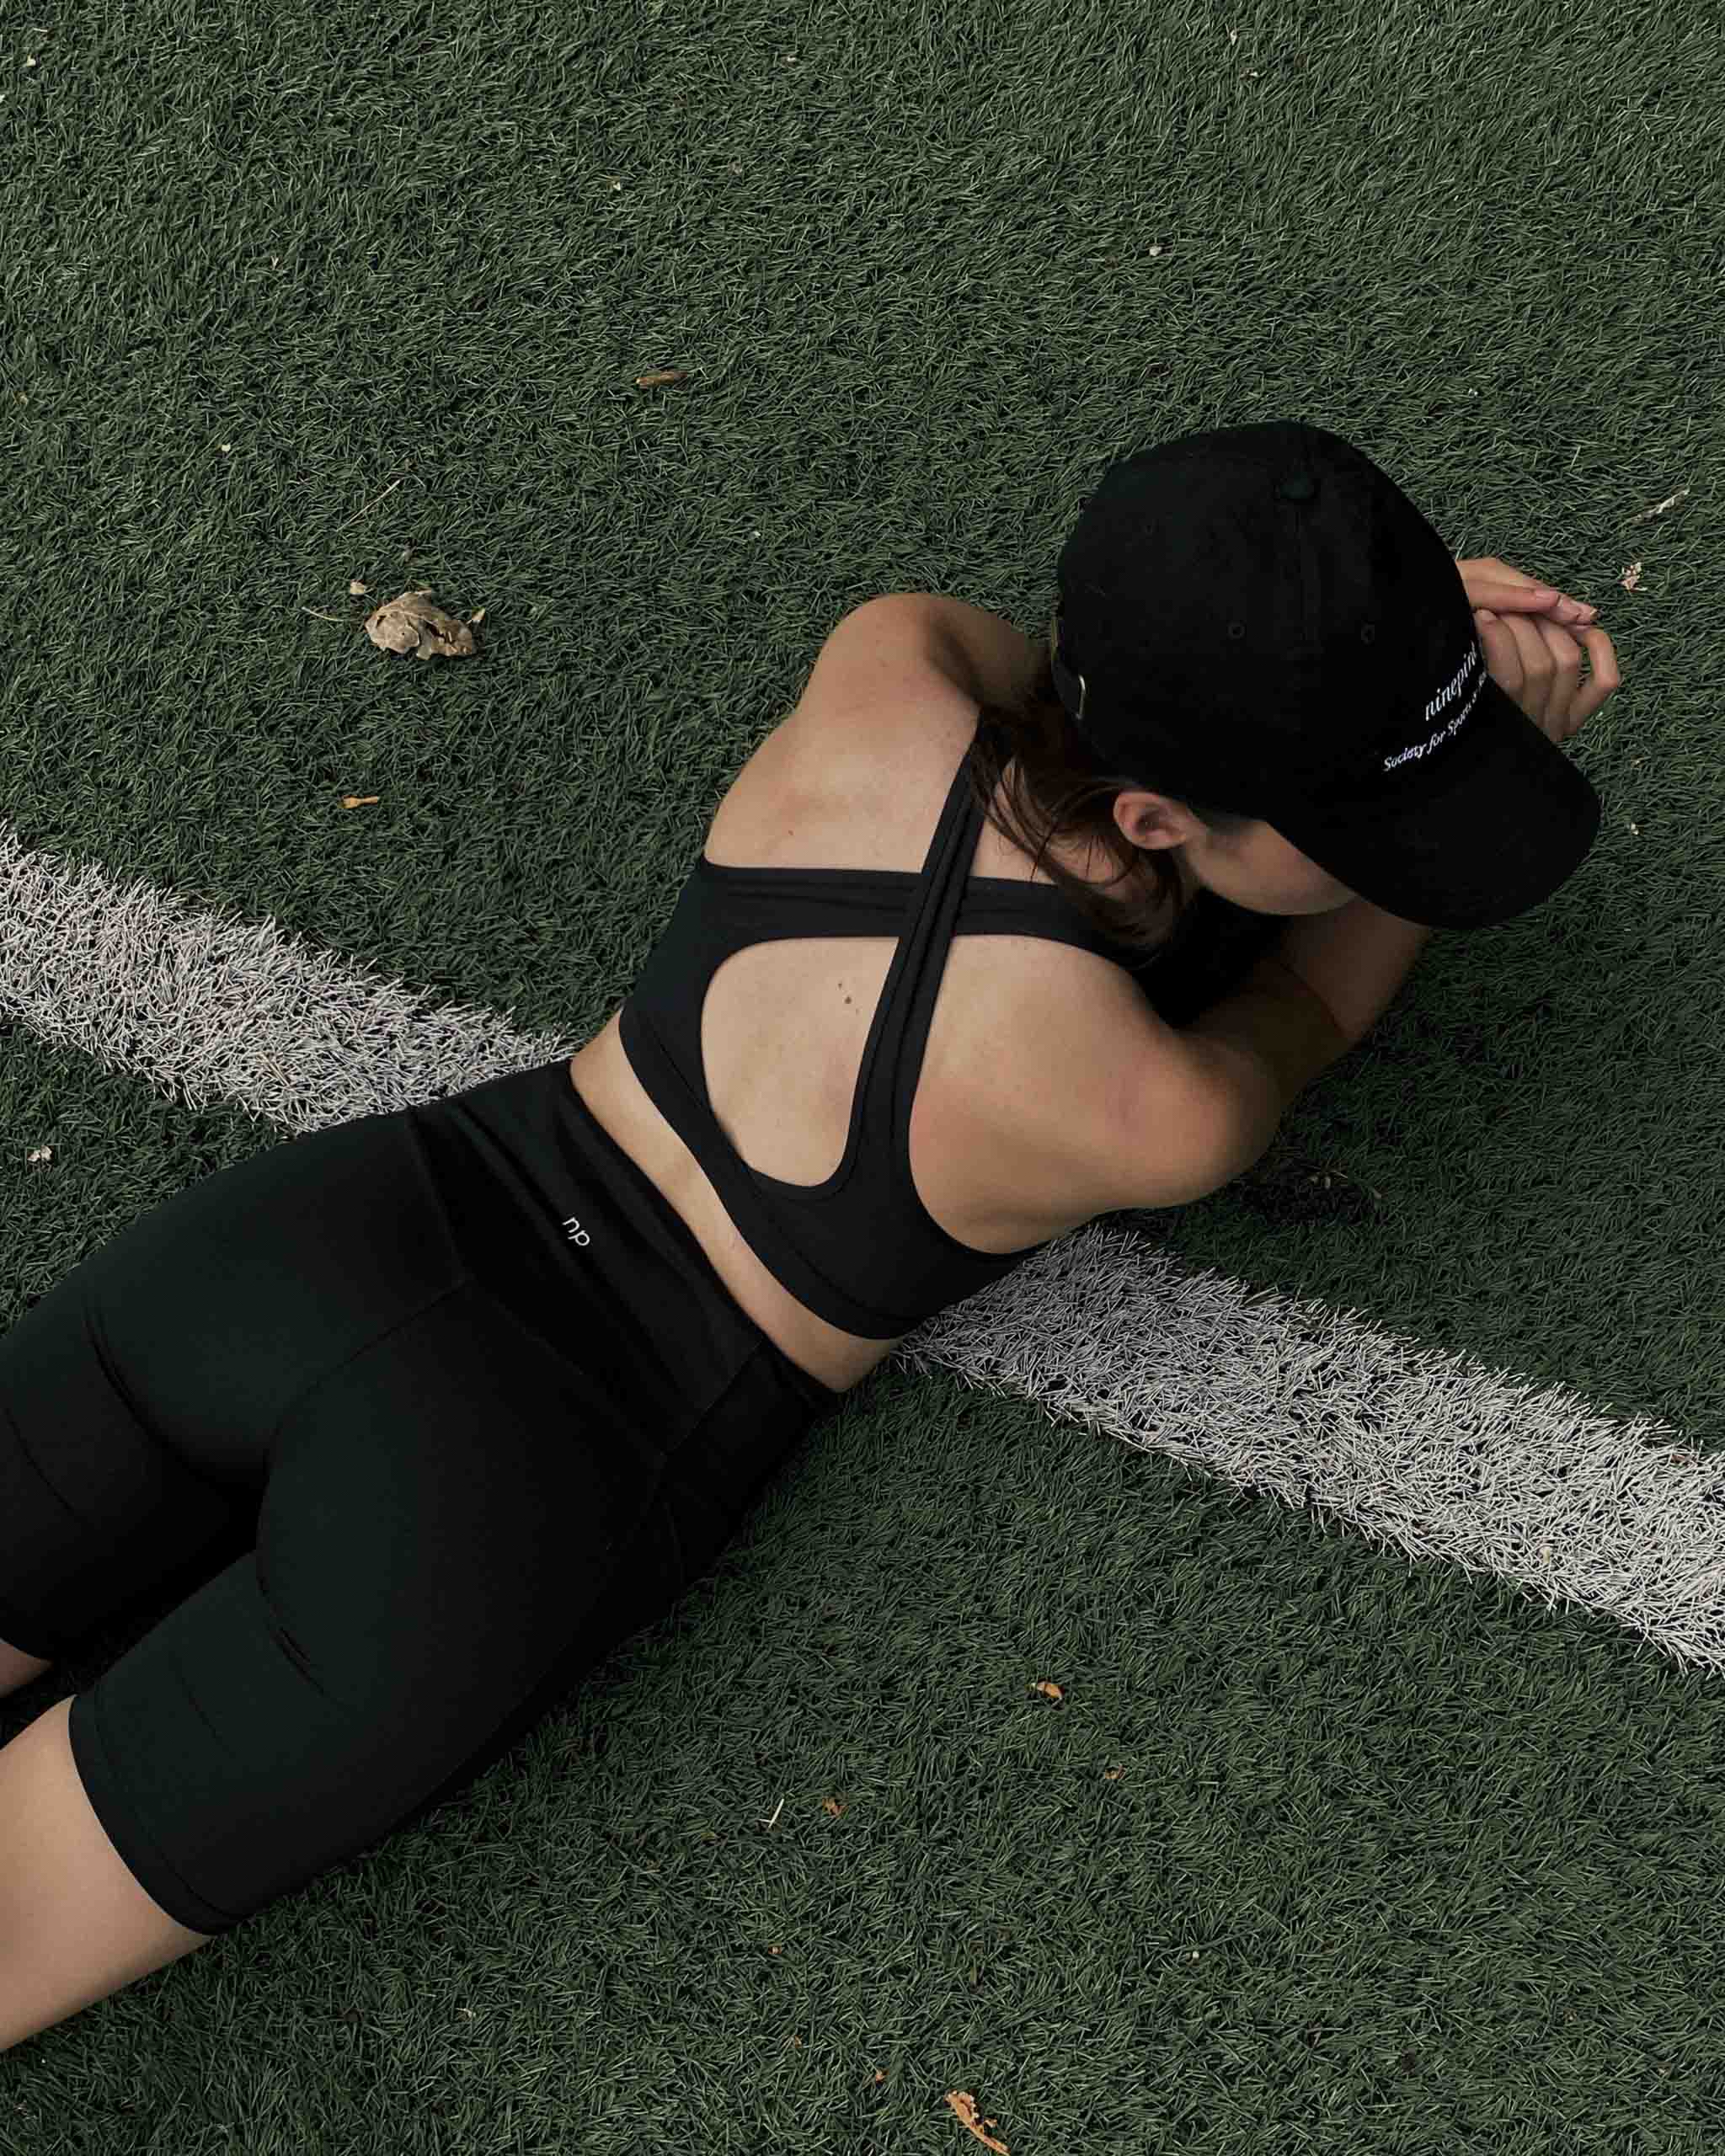 Girl in ninepine cap, ninepine biker shorts and bra lying on synthetic grass